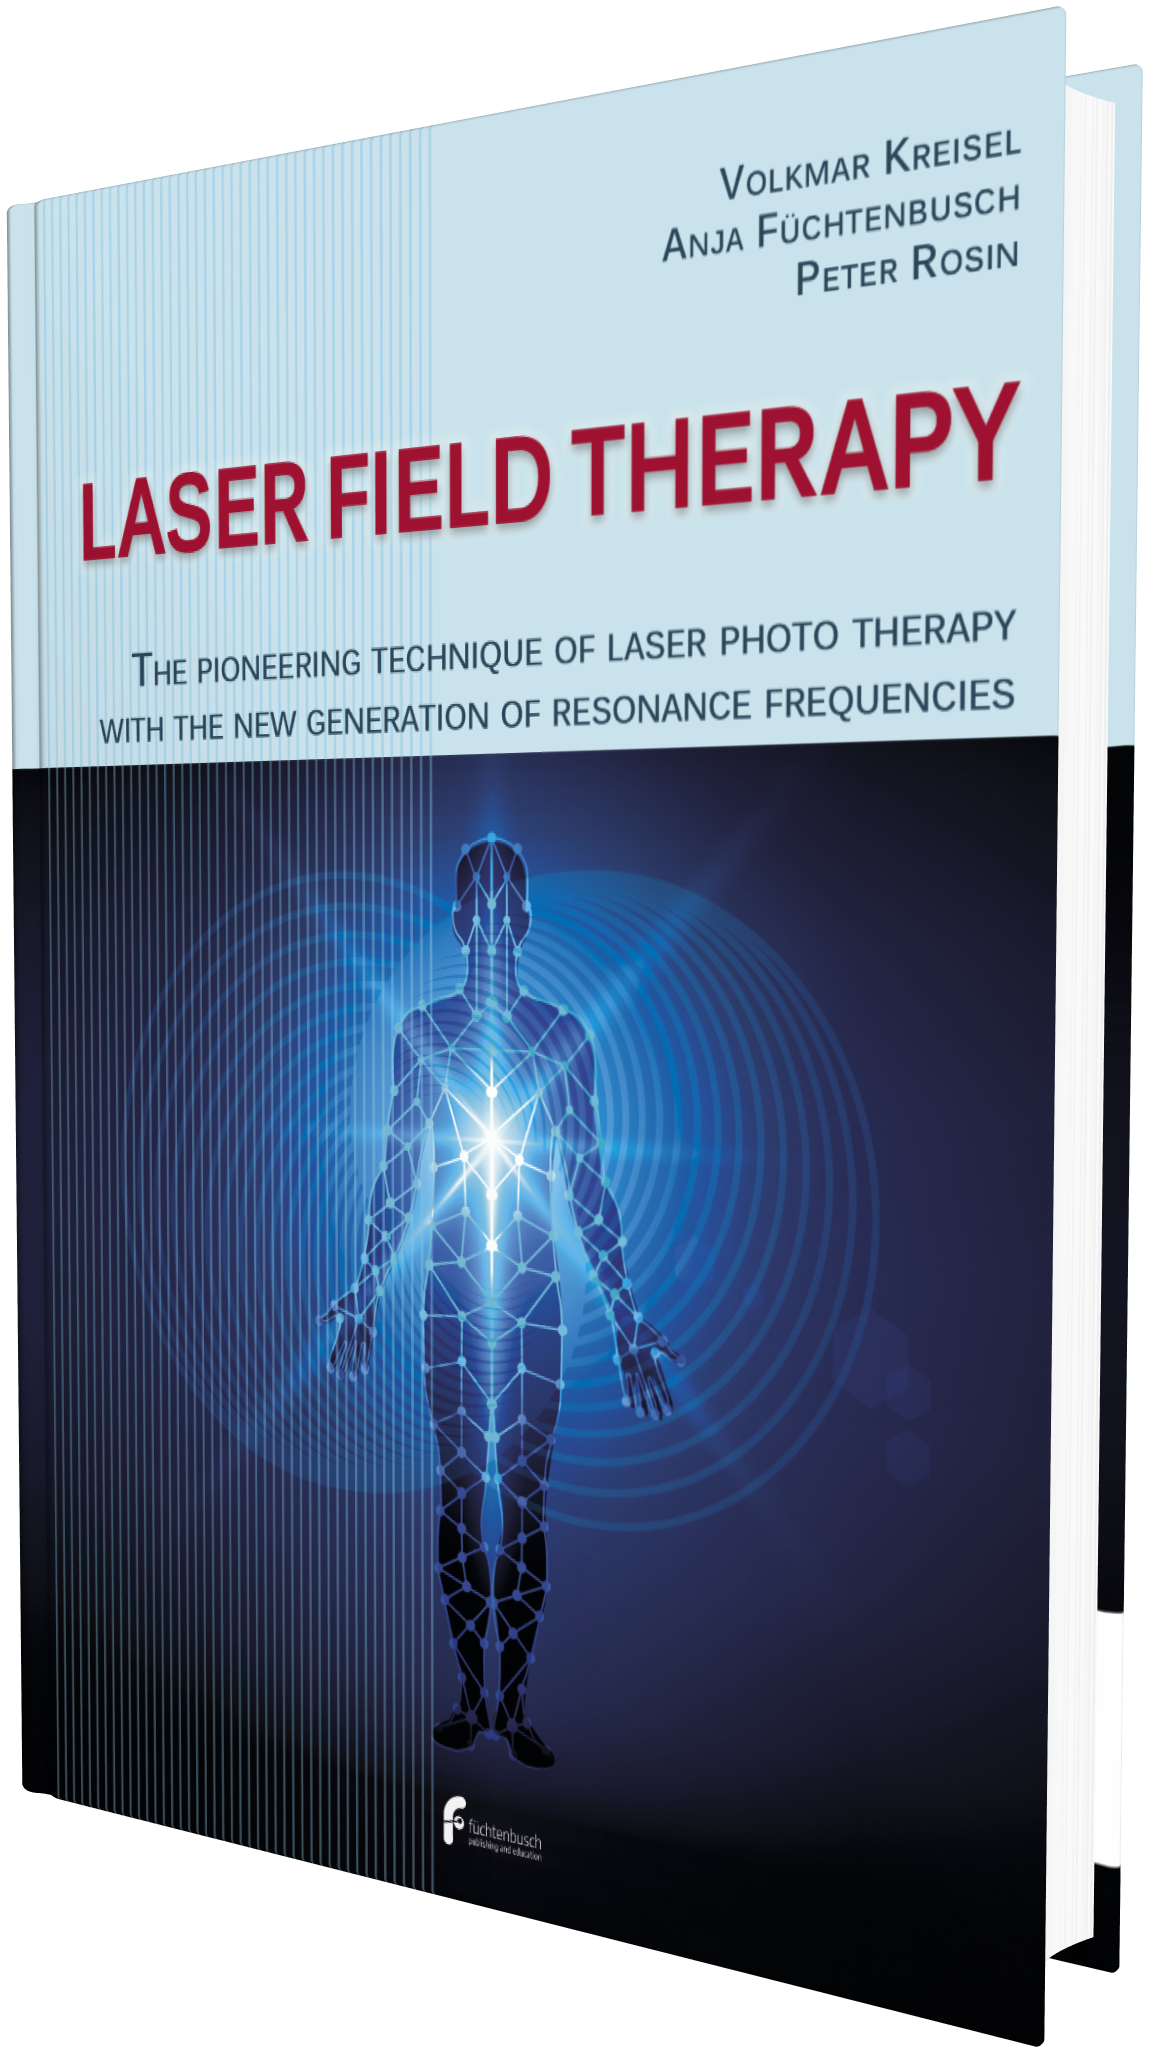 laser field therapy